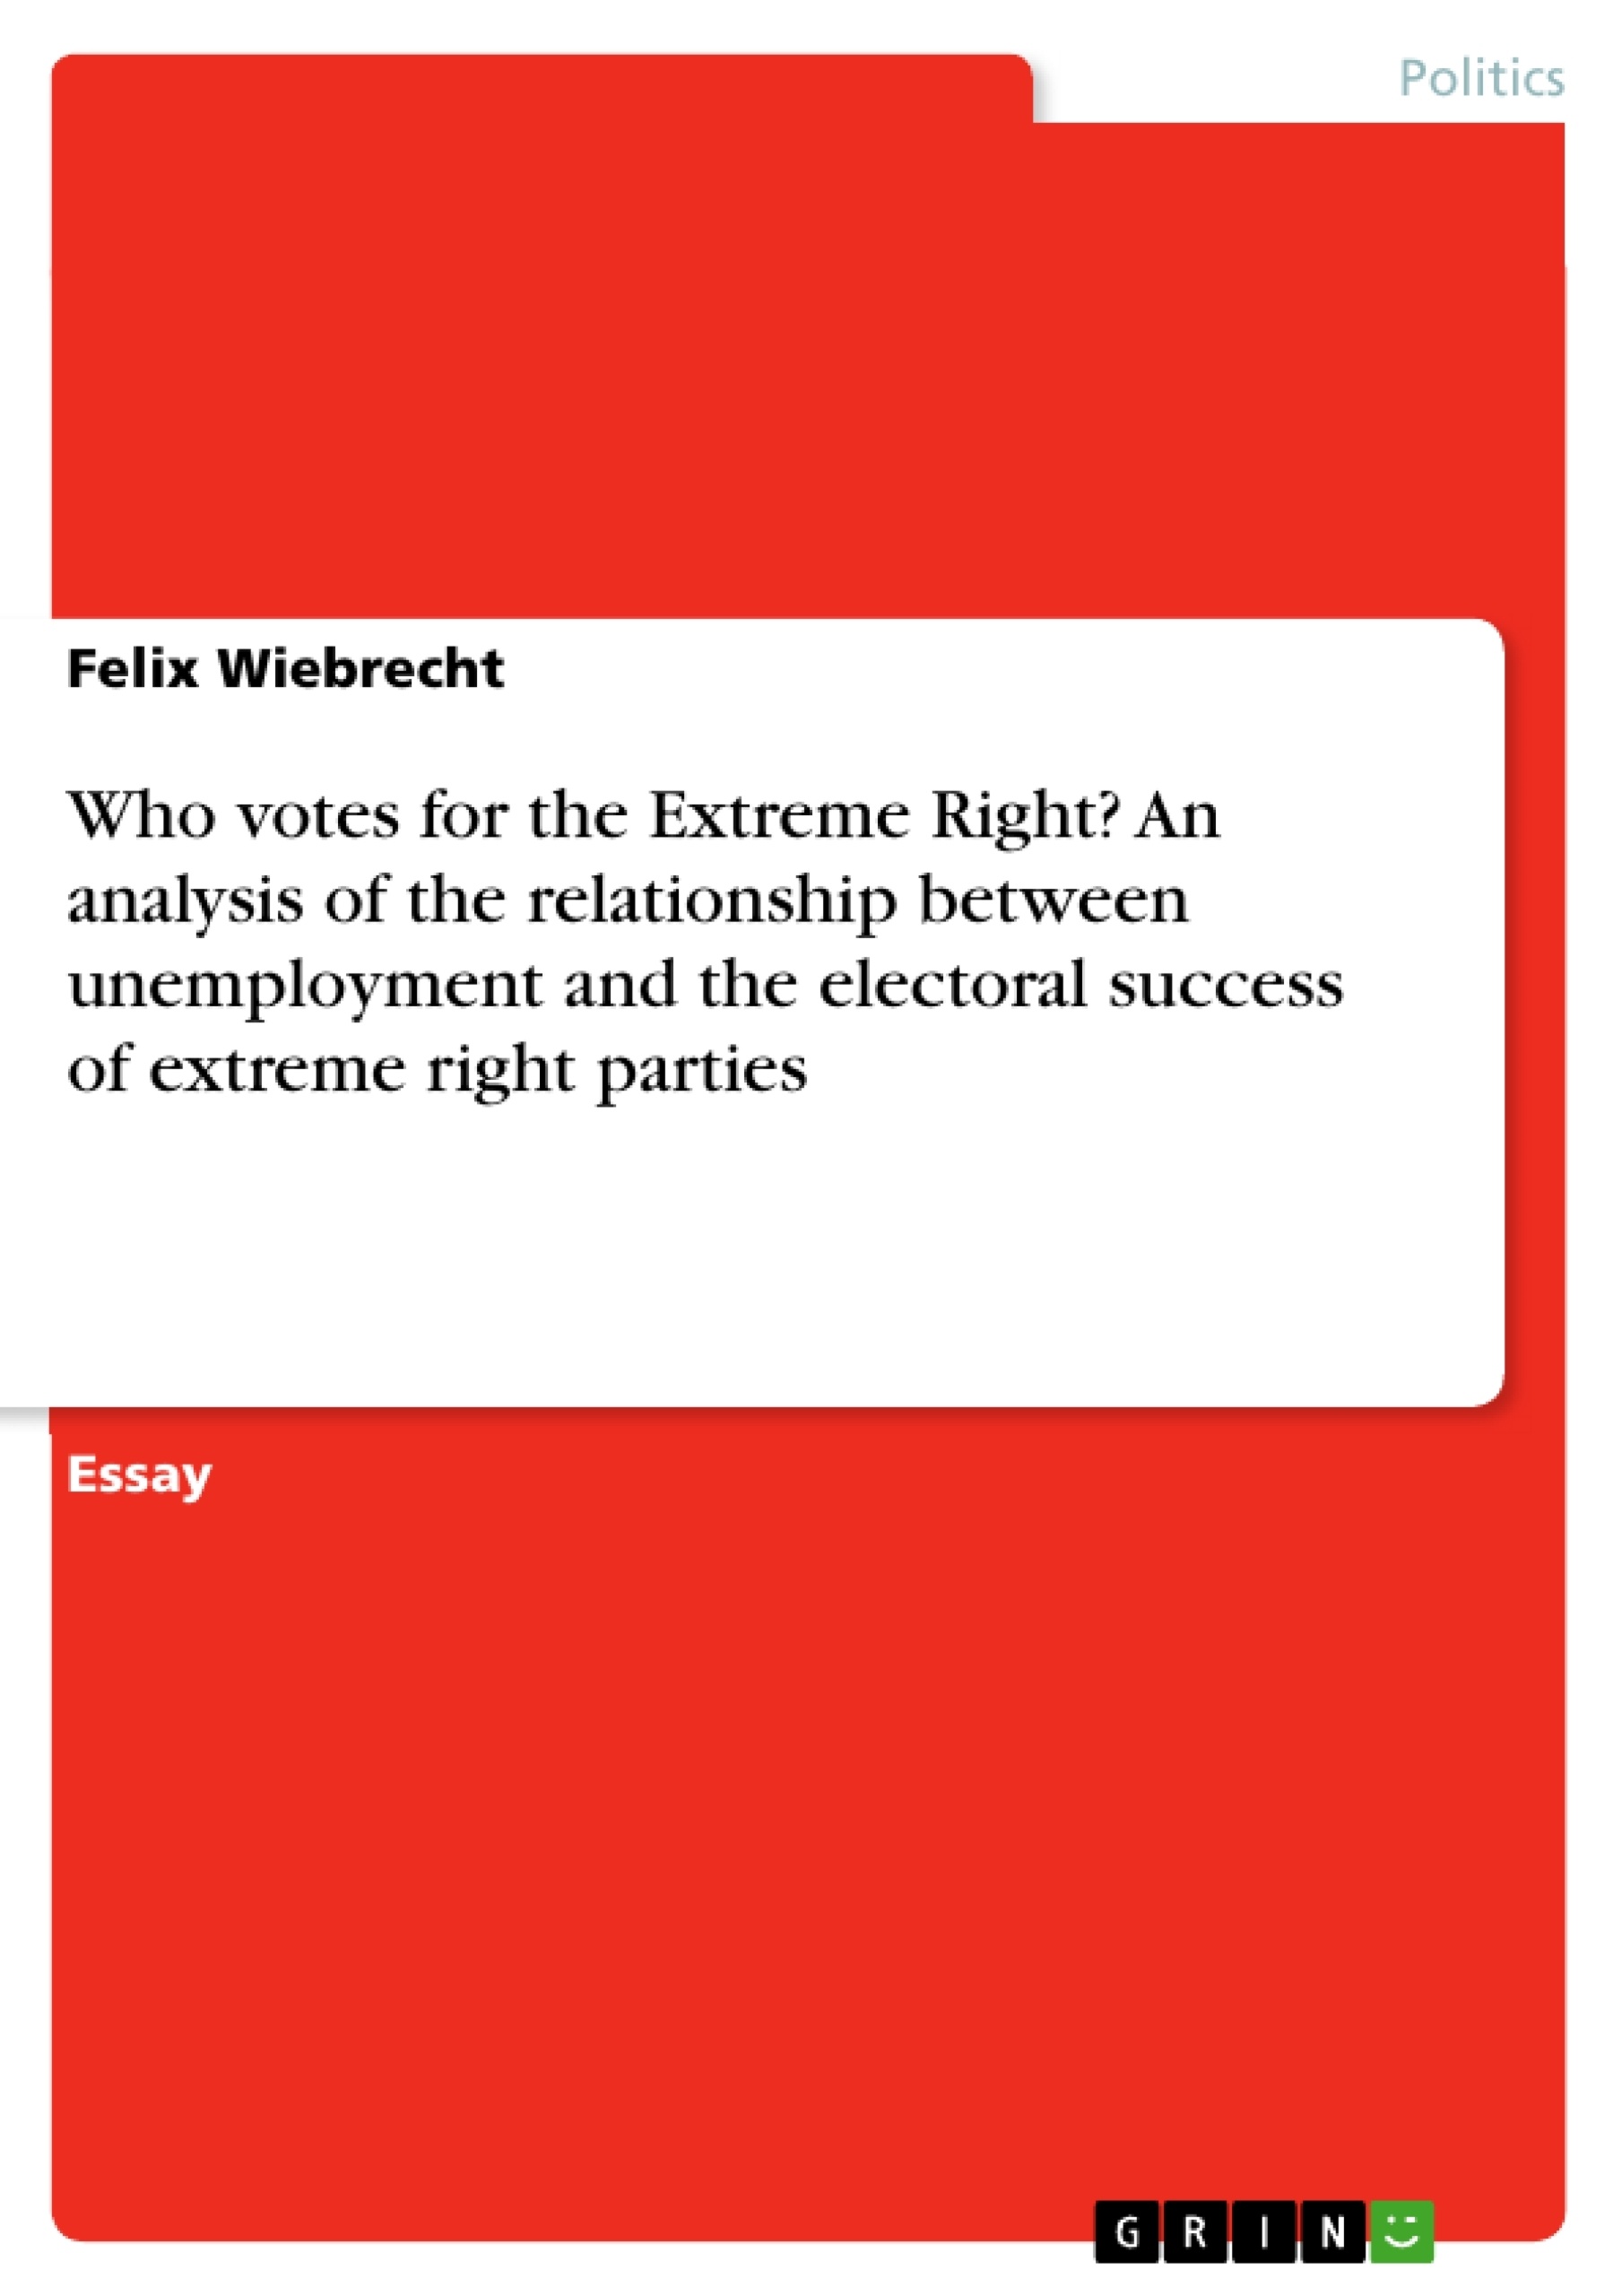 Titel: Who votes for the Extreme Right? An analysis of the relationship between unemployment and the electoral success of extreme right parties